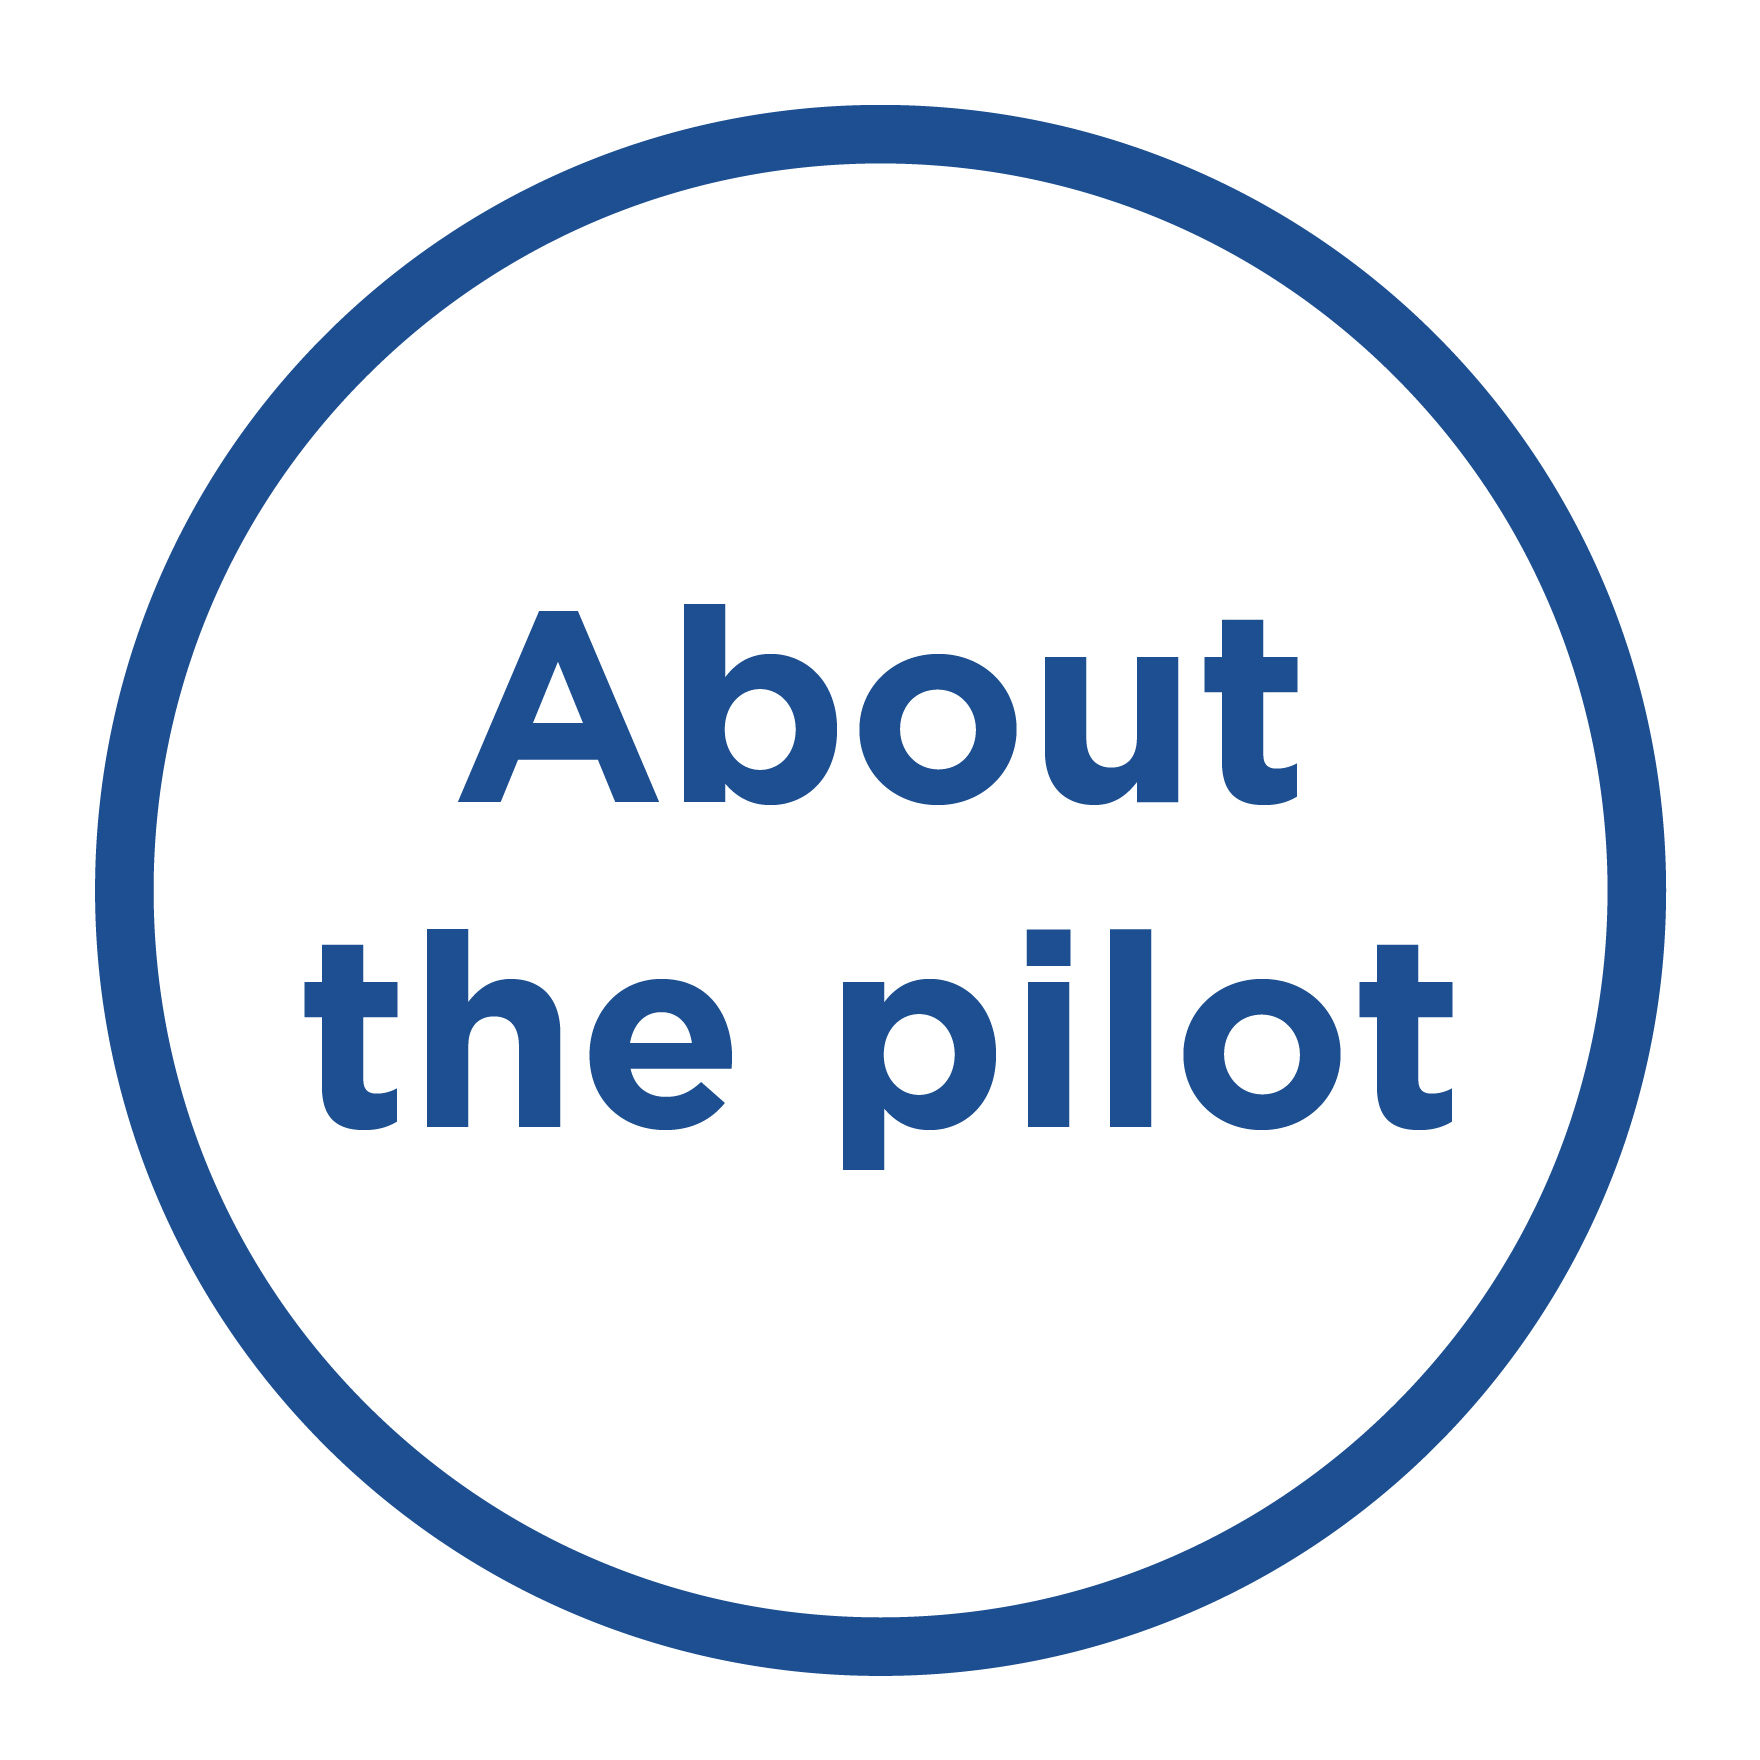 About the pilot